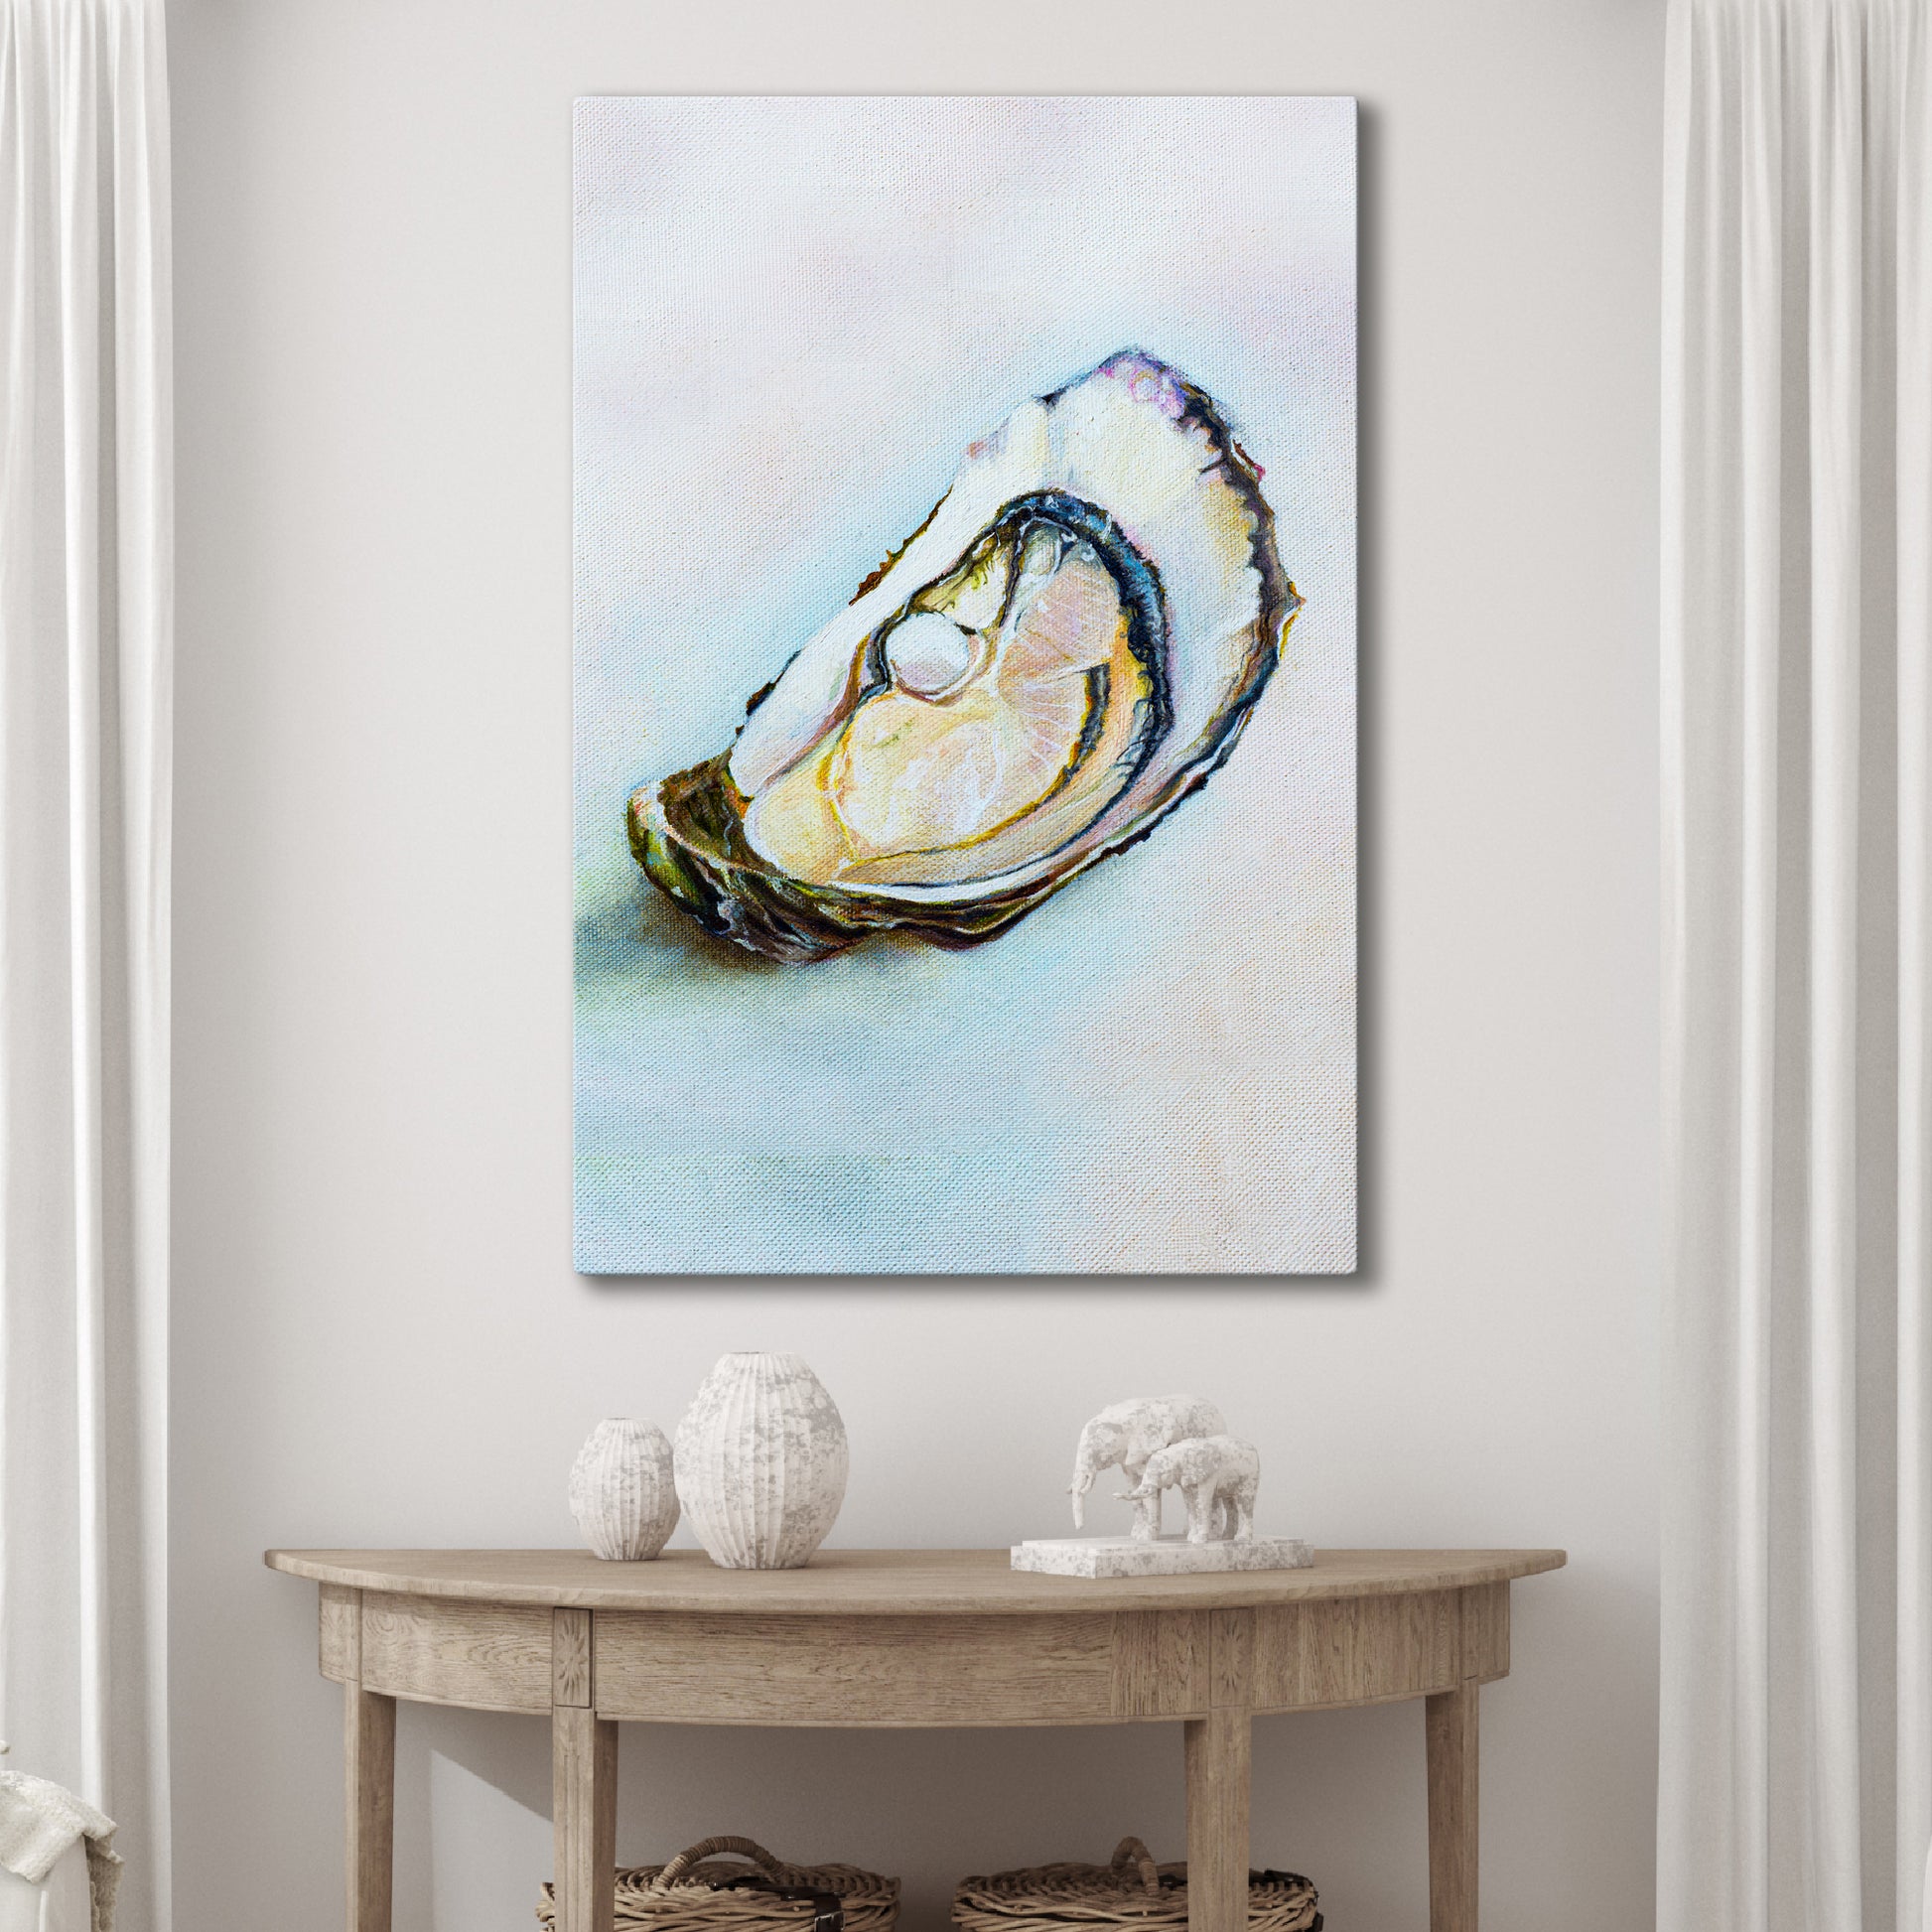 Coastal Oyster Shell Canvas Wall Art - Image by Tailored Canvases